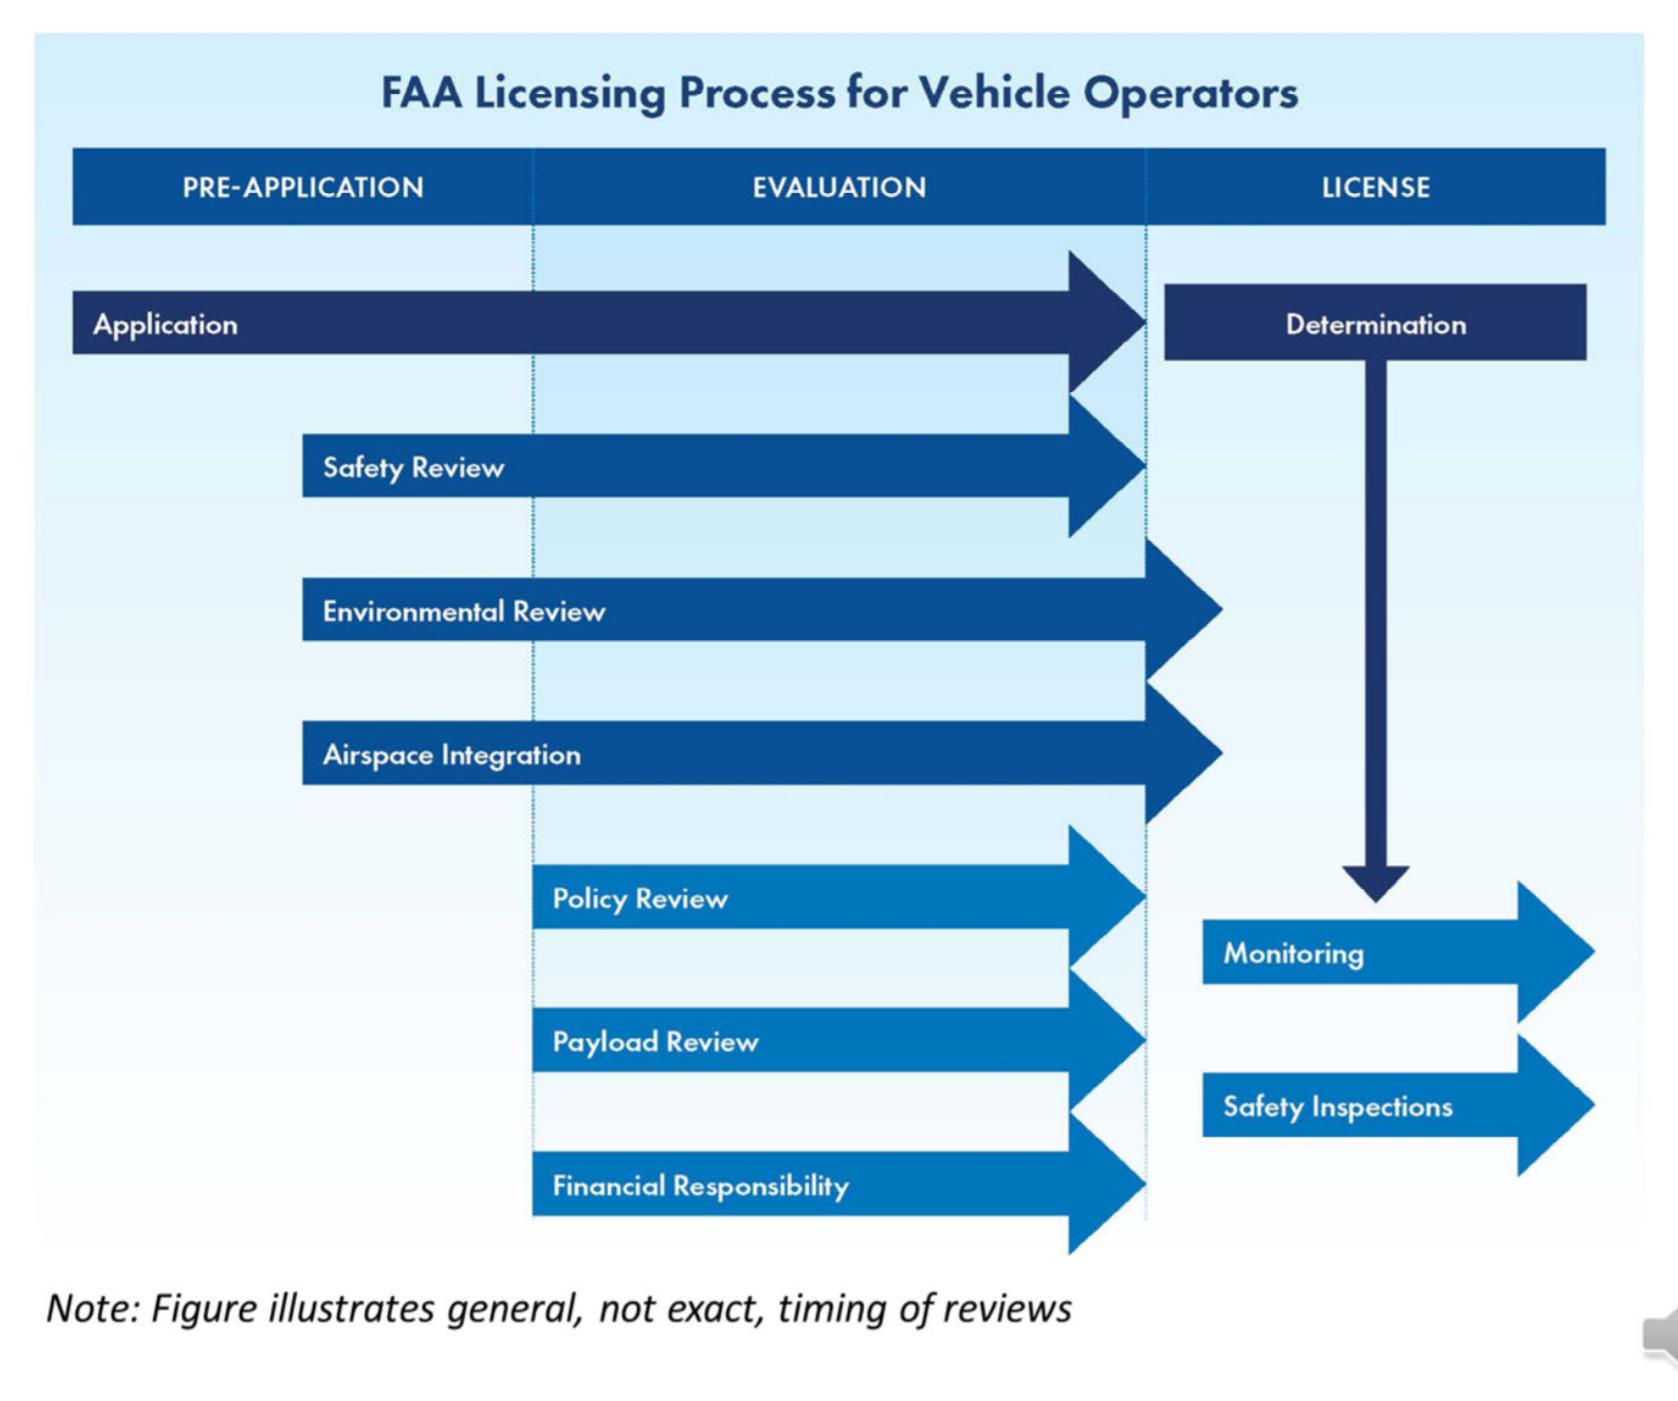 FAA launch licensing process